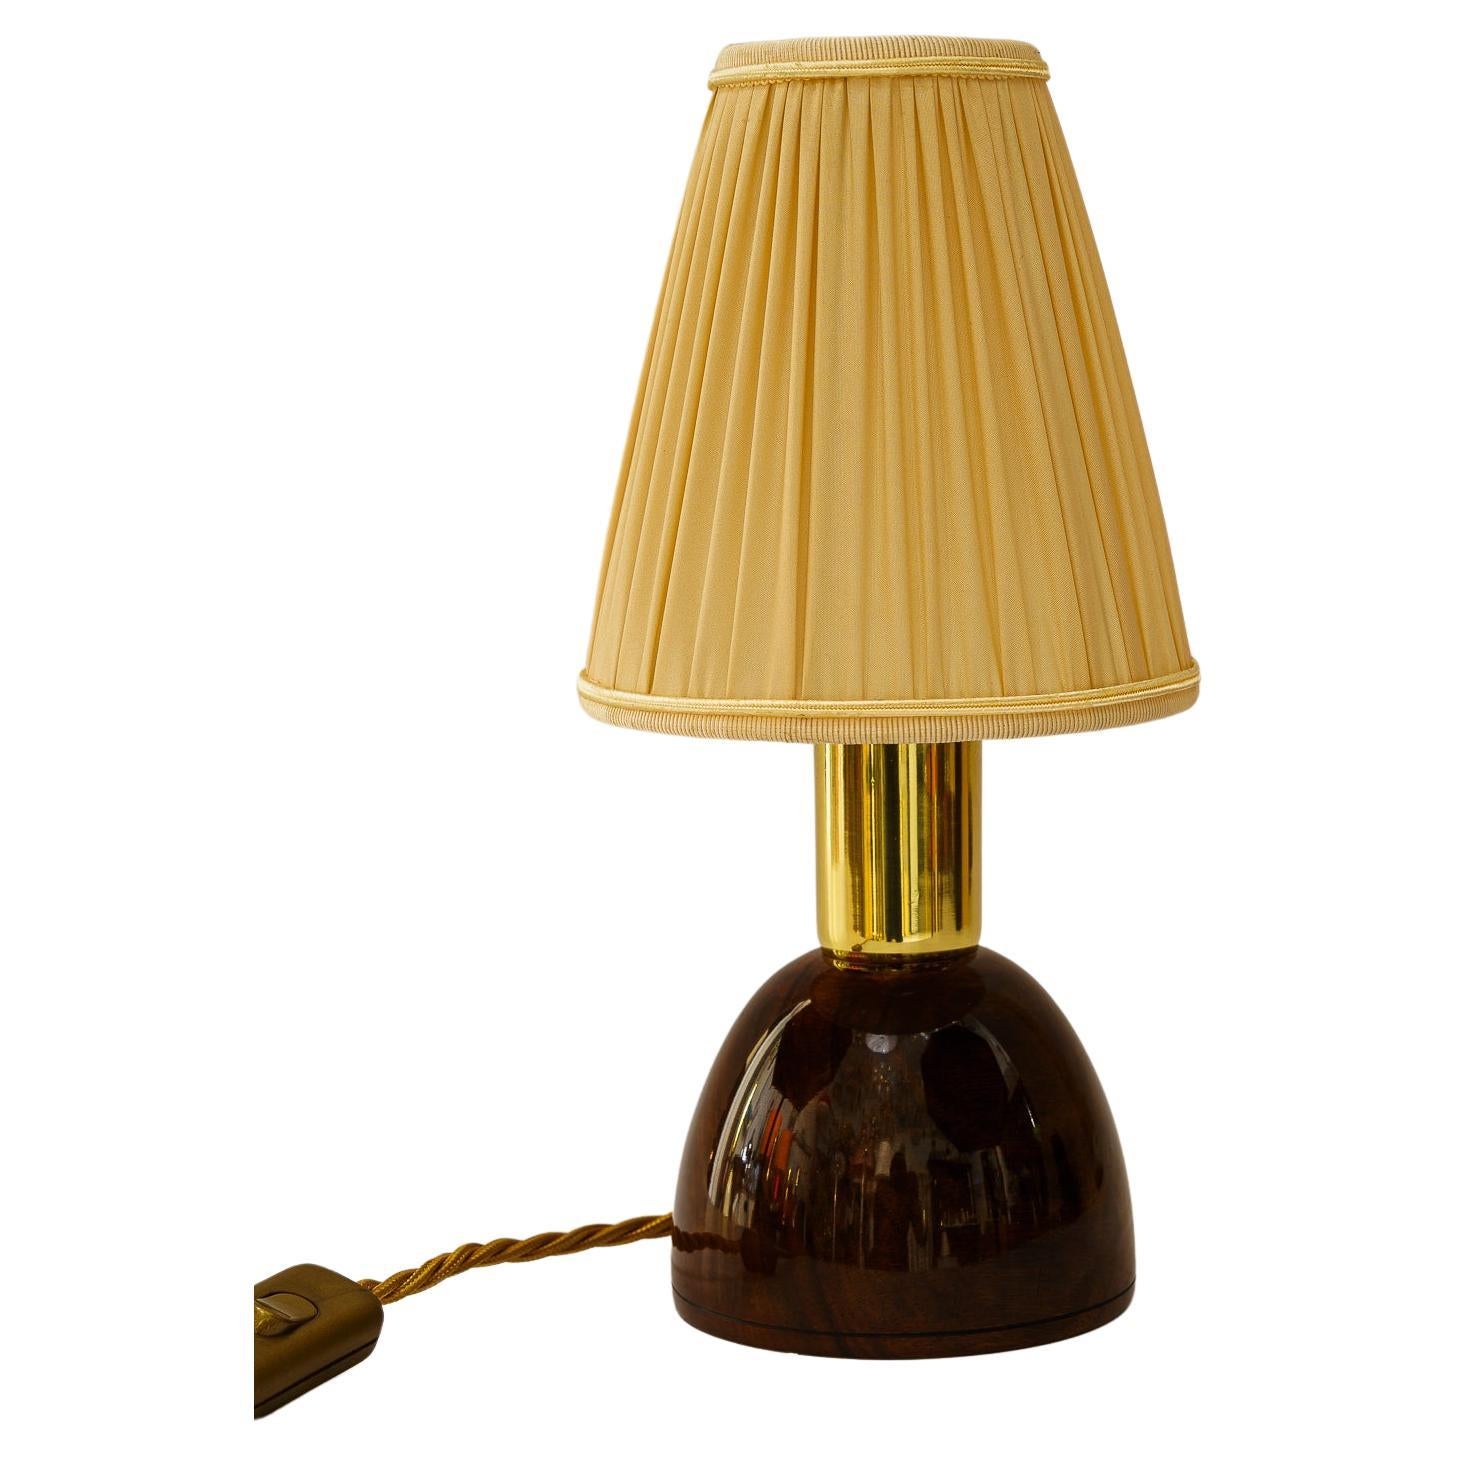 Rupert nikoll nut wood table lamp with fabric shade vienna around 1950s For Sale